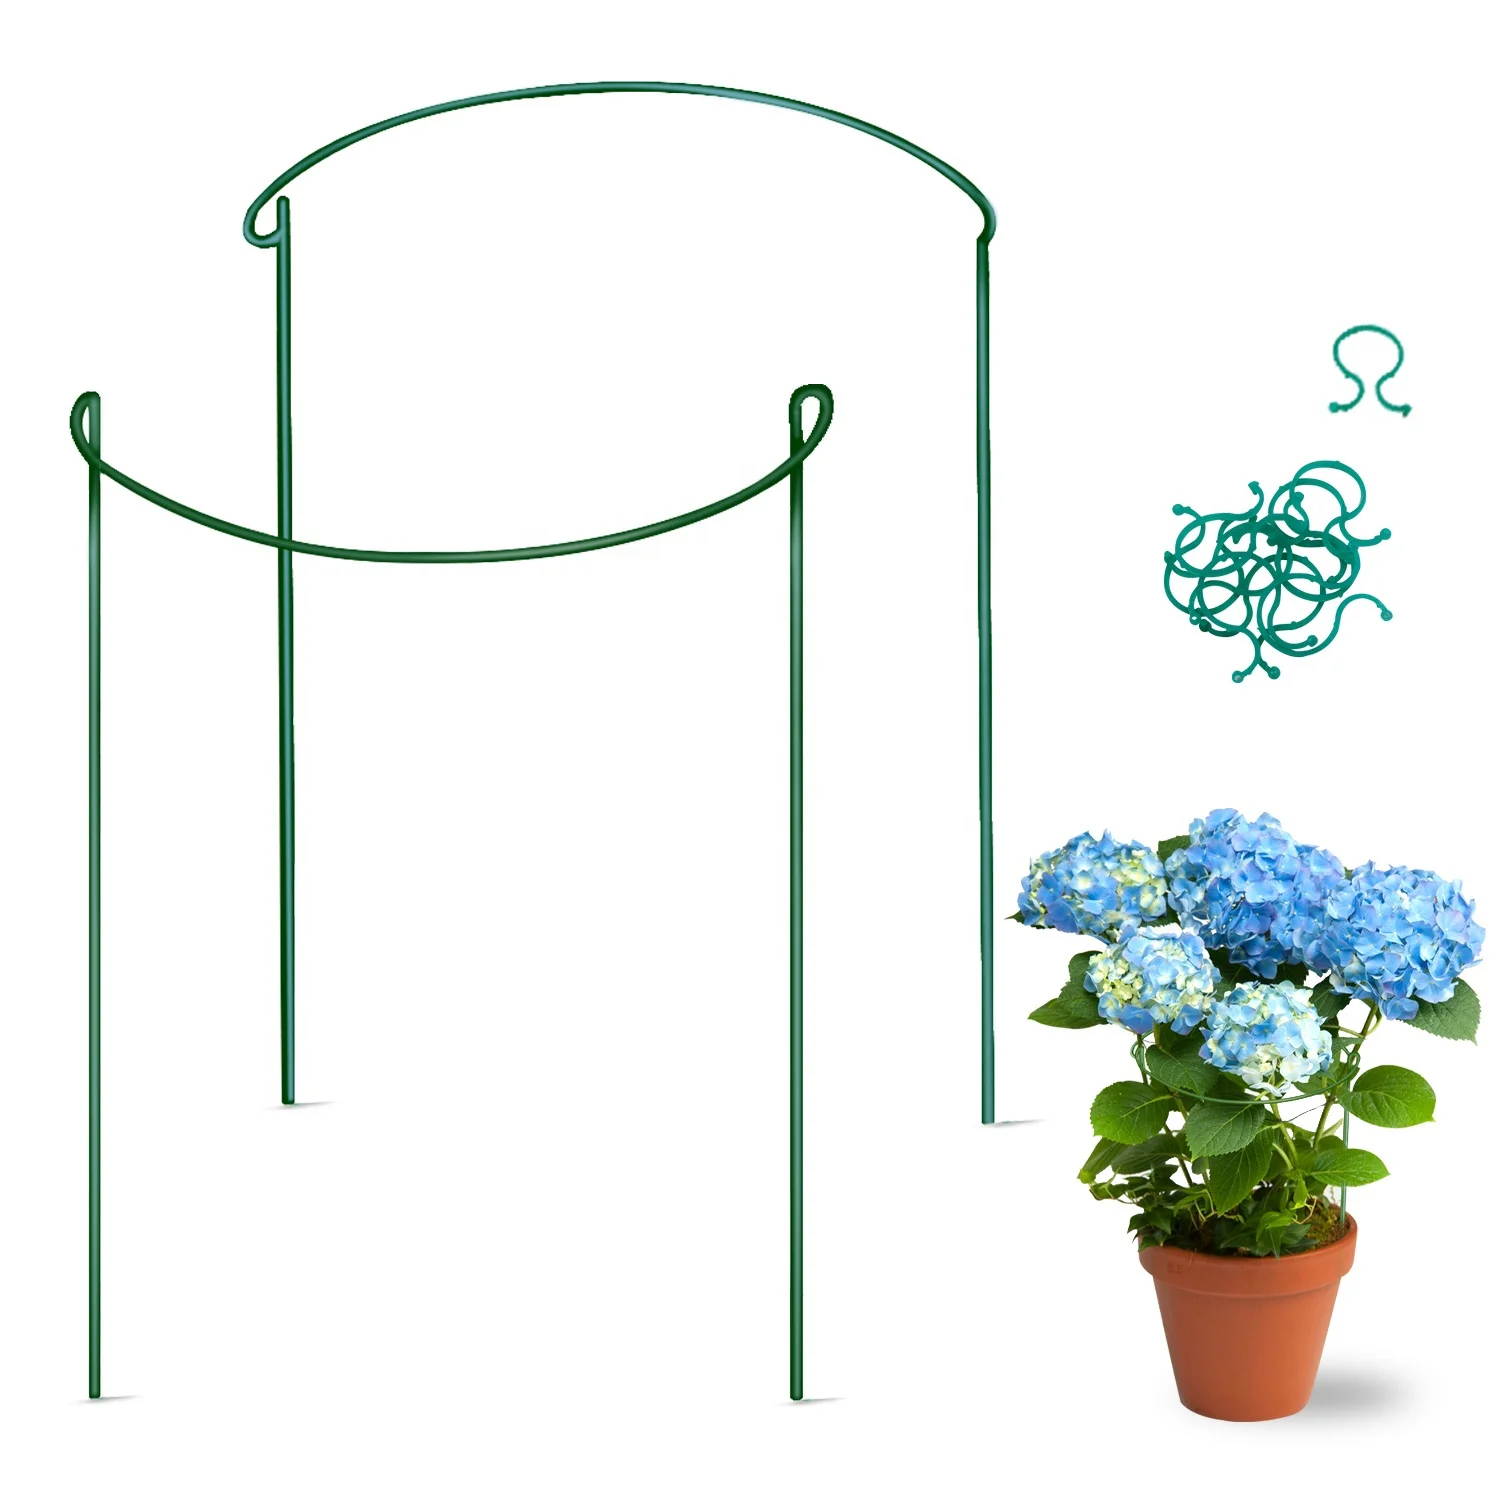 Details about   Plant Support Stake Half Round Metal Garden Plant Support Ring Steel w/ Plastic 